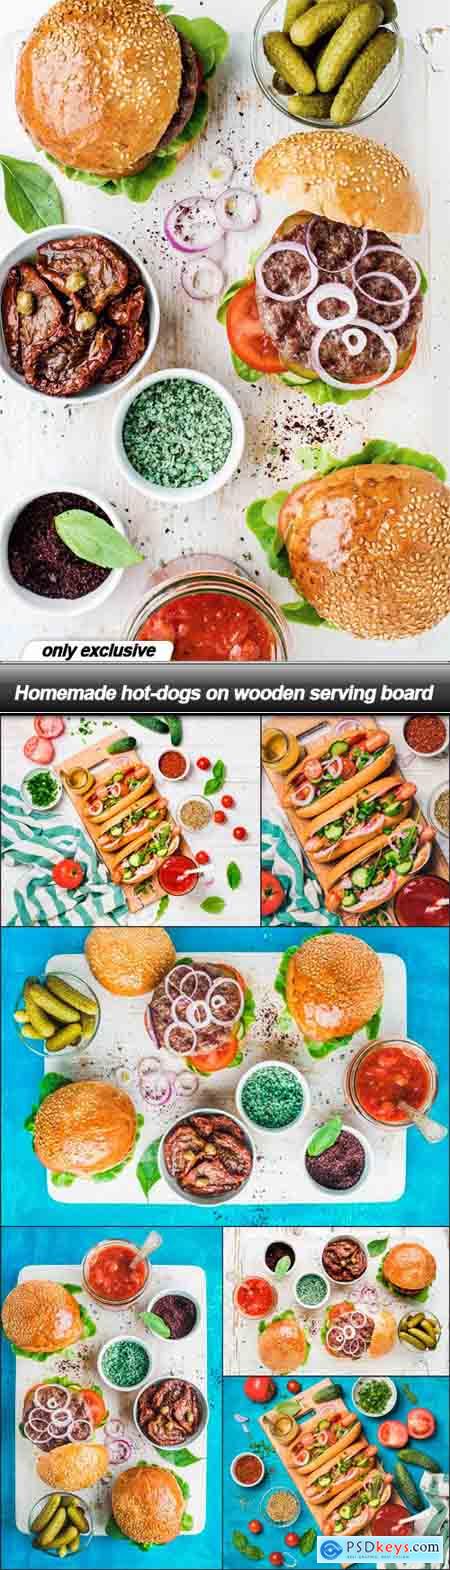 Homemade hot-dogs on wooden serving board - 7 UHQ JPEG